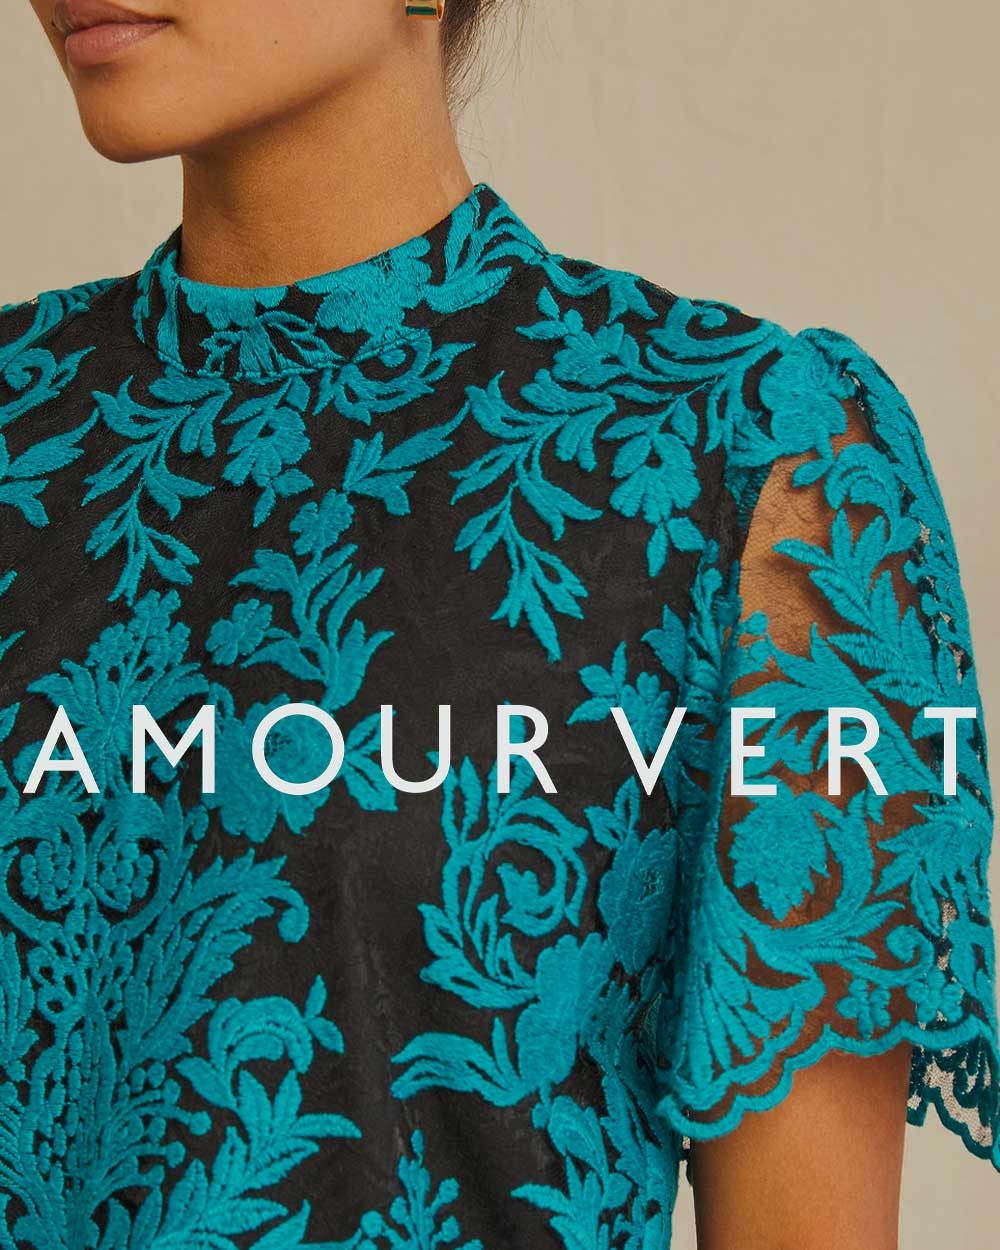 AMOUR VERT upcycled clothing